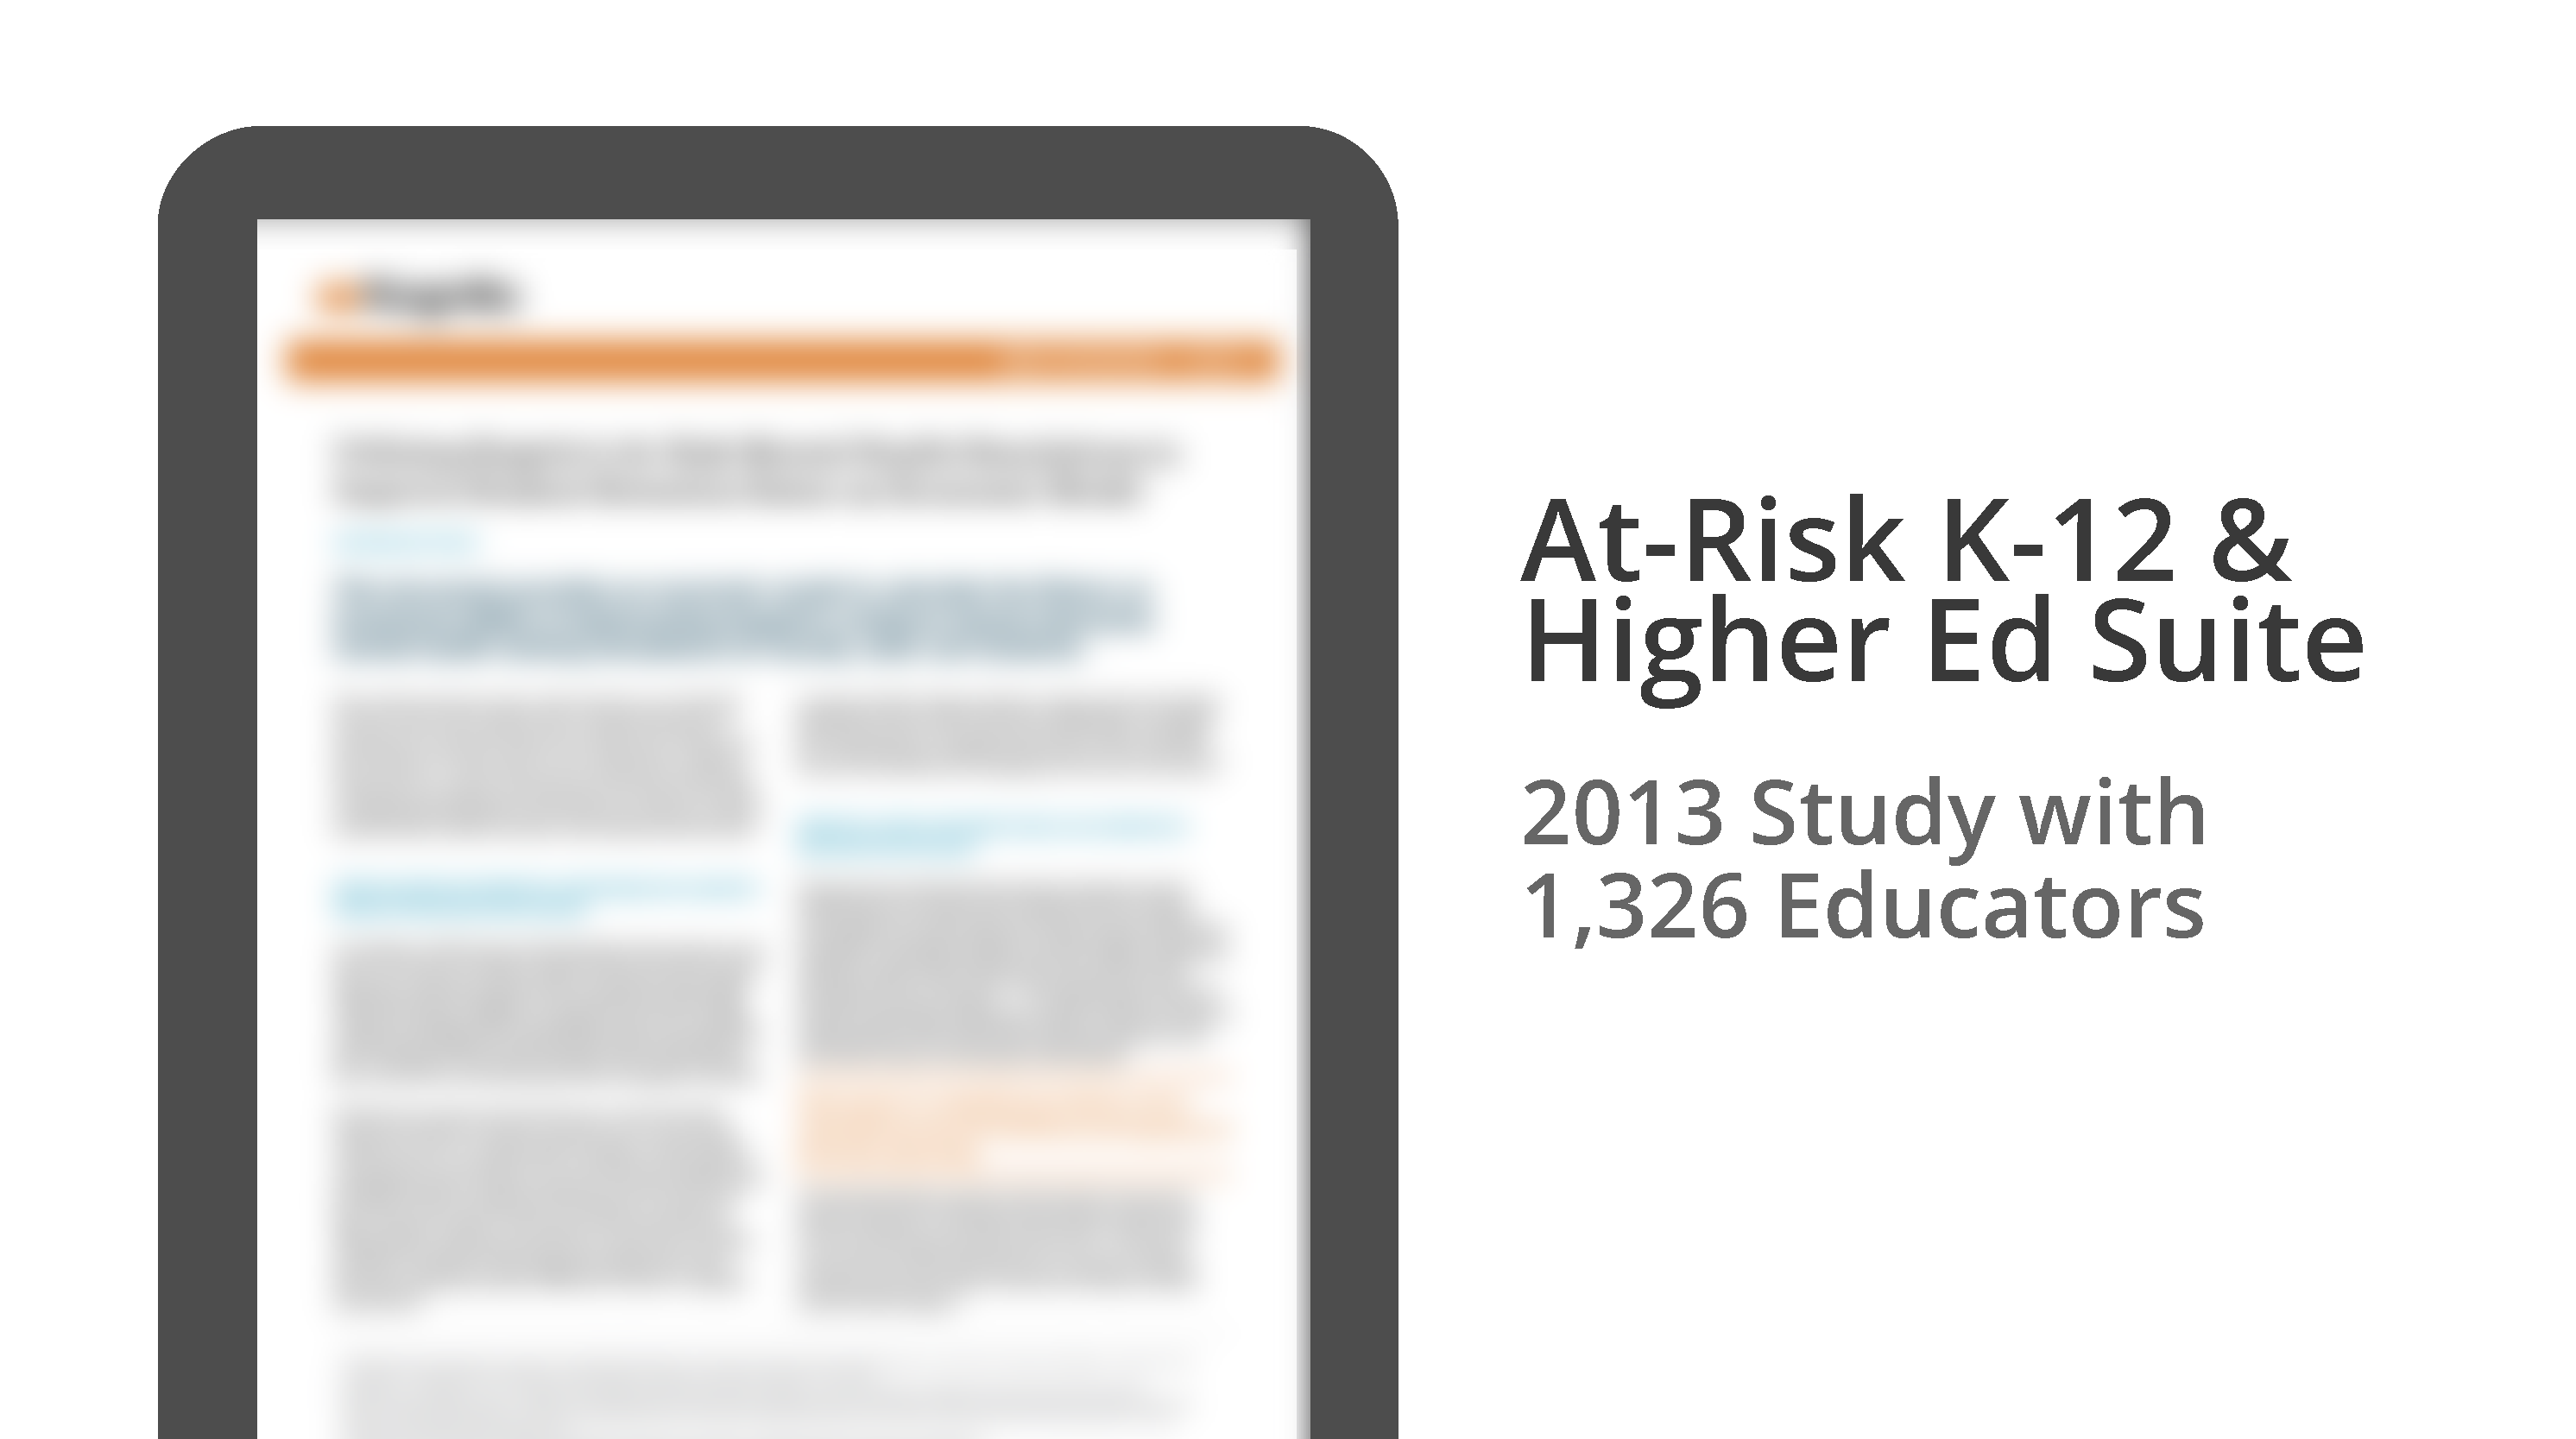 At-Risk K-12 and Higher Ed Suite